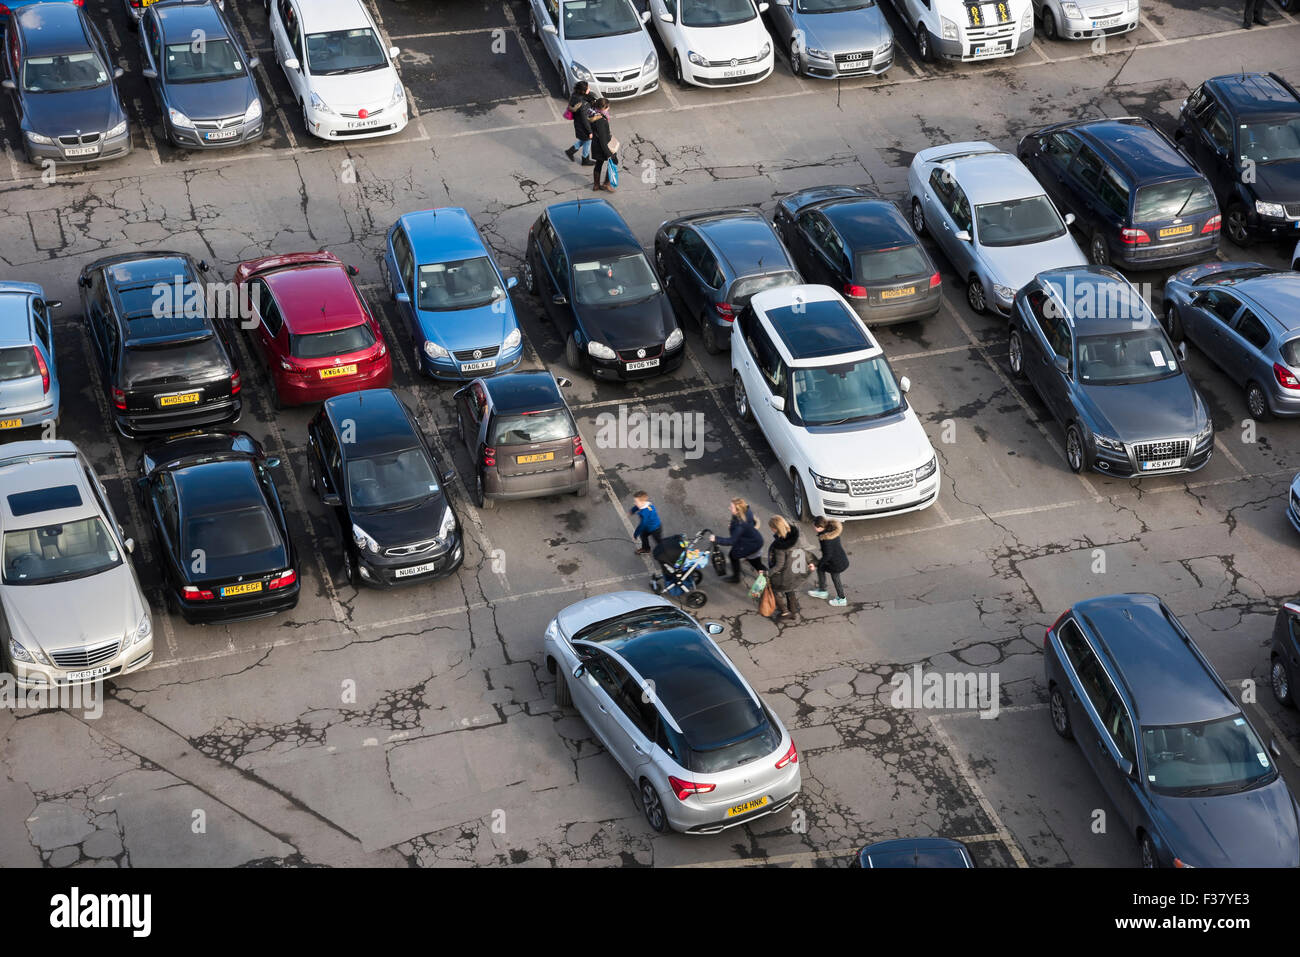 High view from Clifford's Tower - people walking, cars driving, manoeuvring or parked, in a busy, crowded Castle car park, York, North Yorkshire, UK. Stock Photo